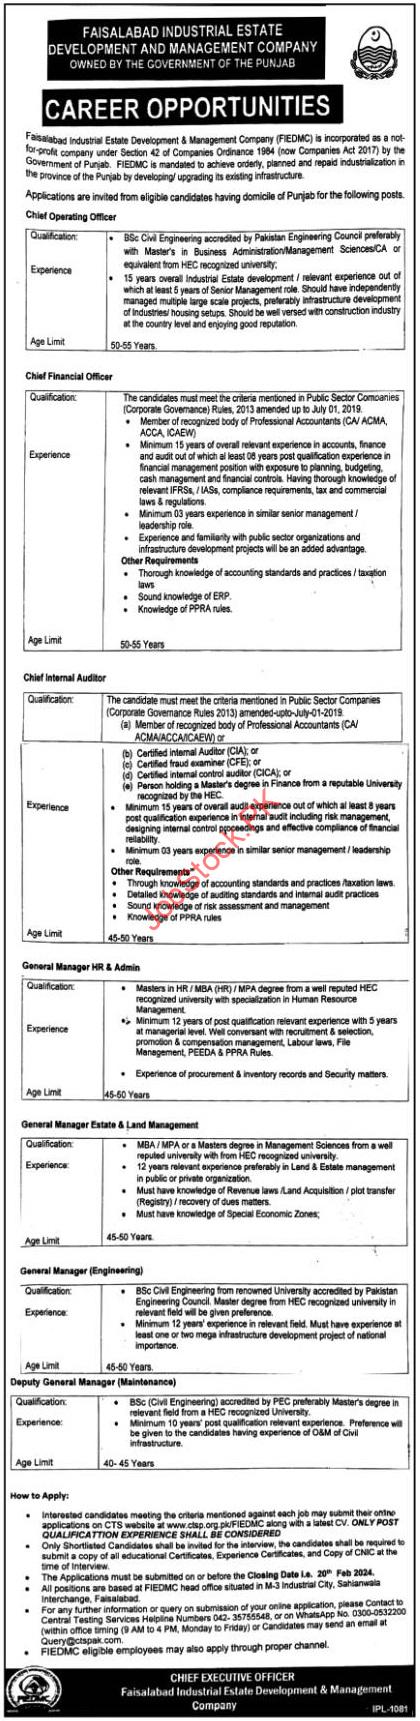 Situations Vacant at Faisalabad Industrial Estate Company